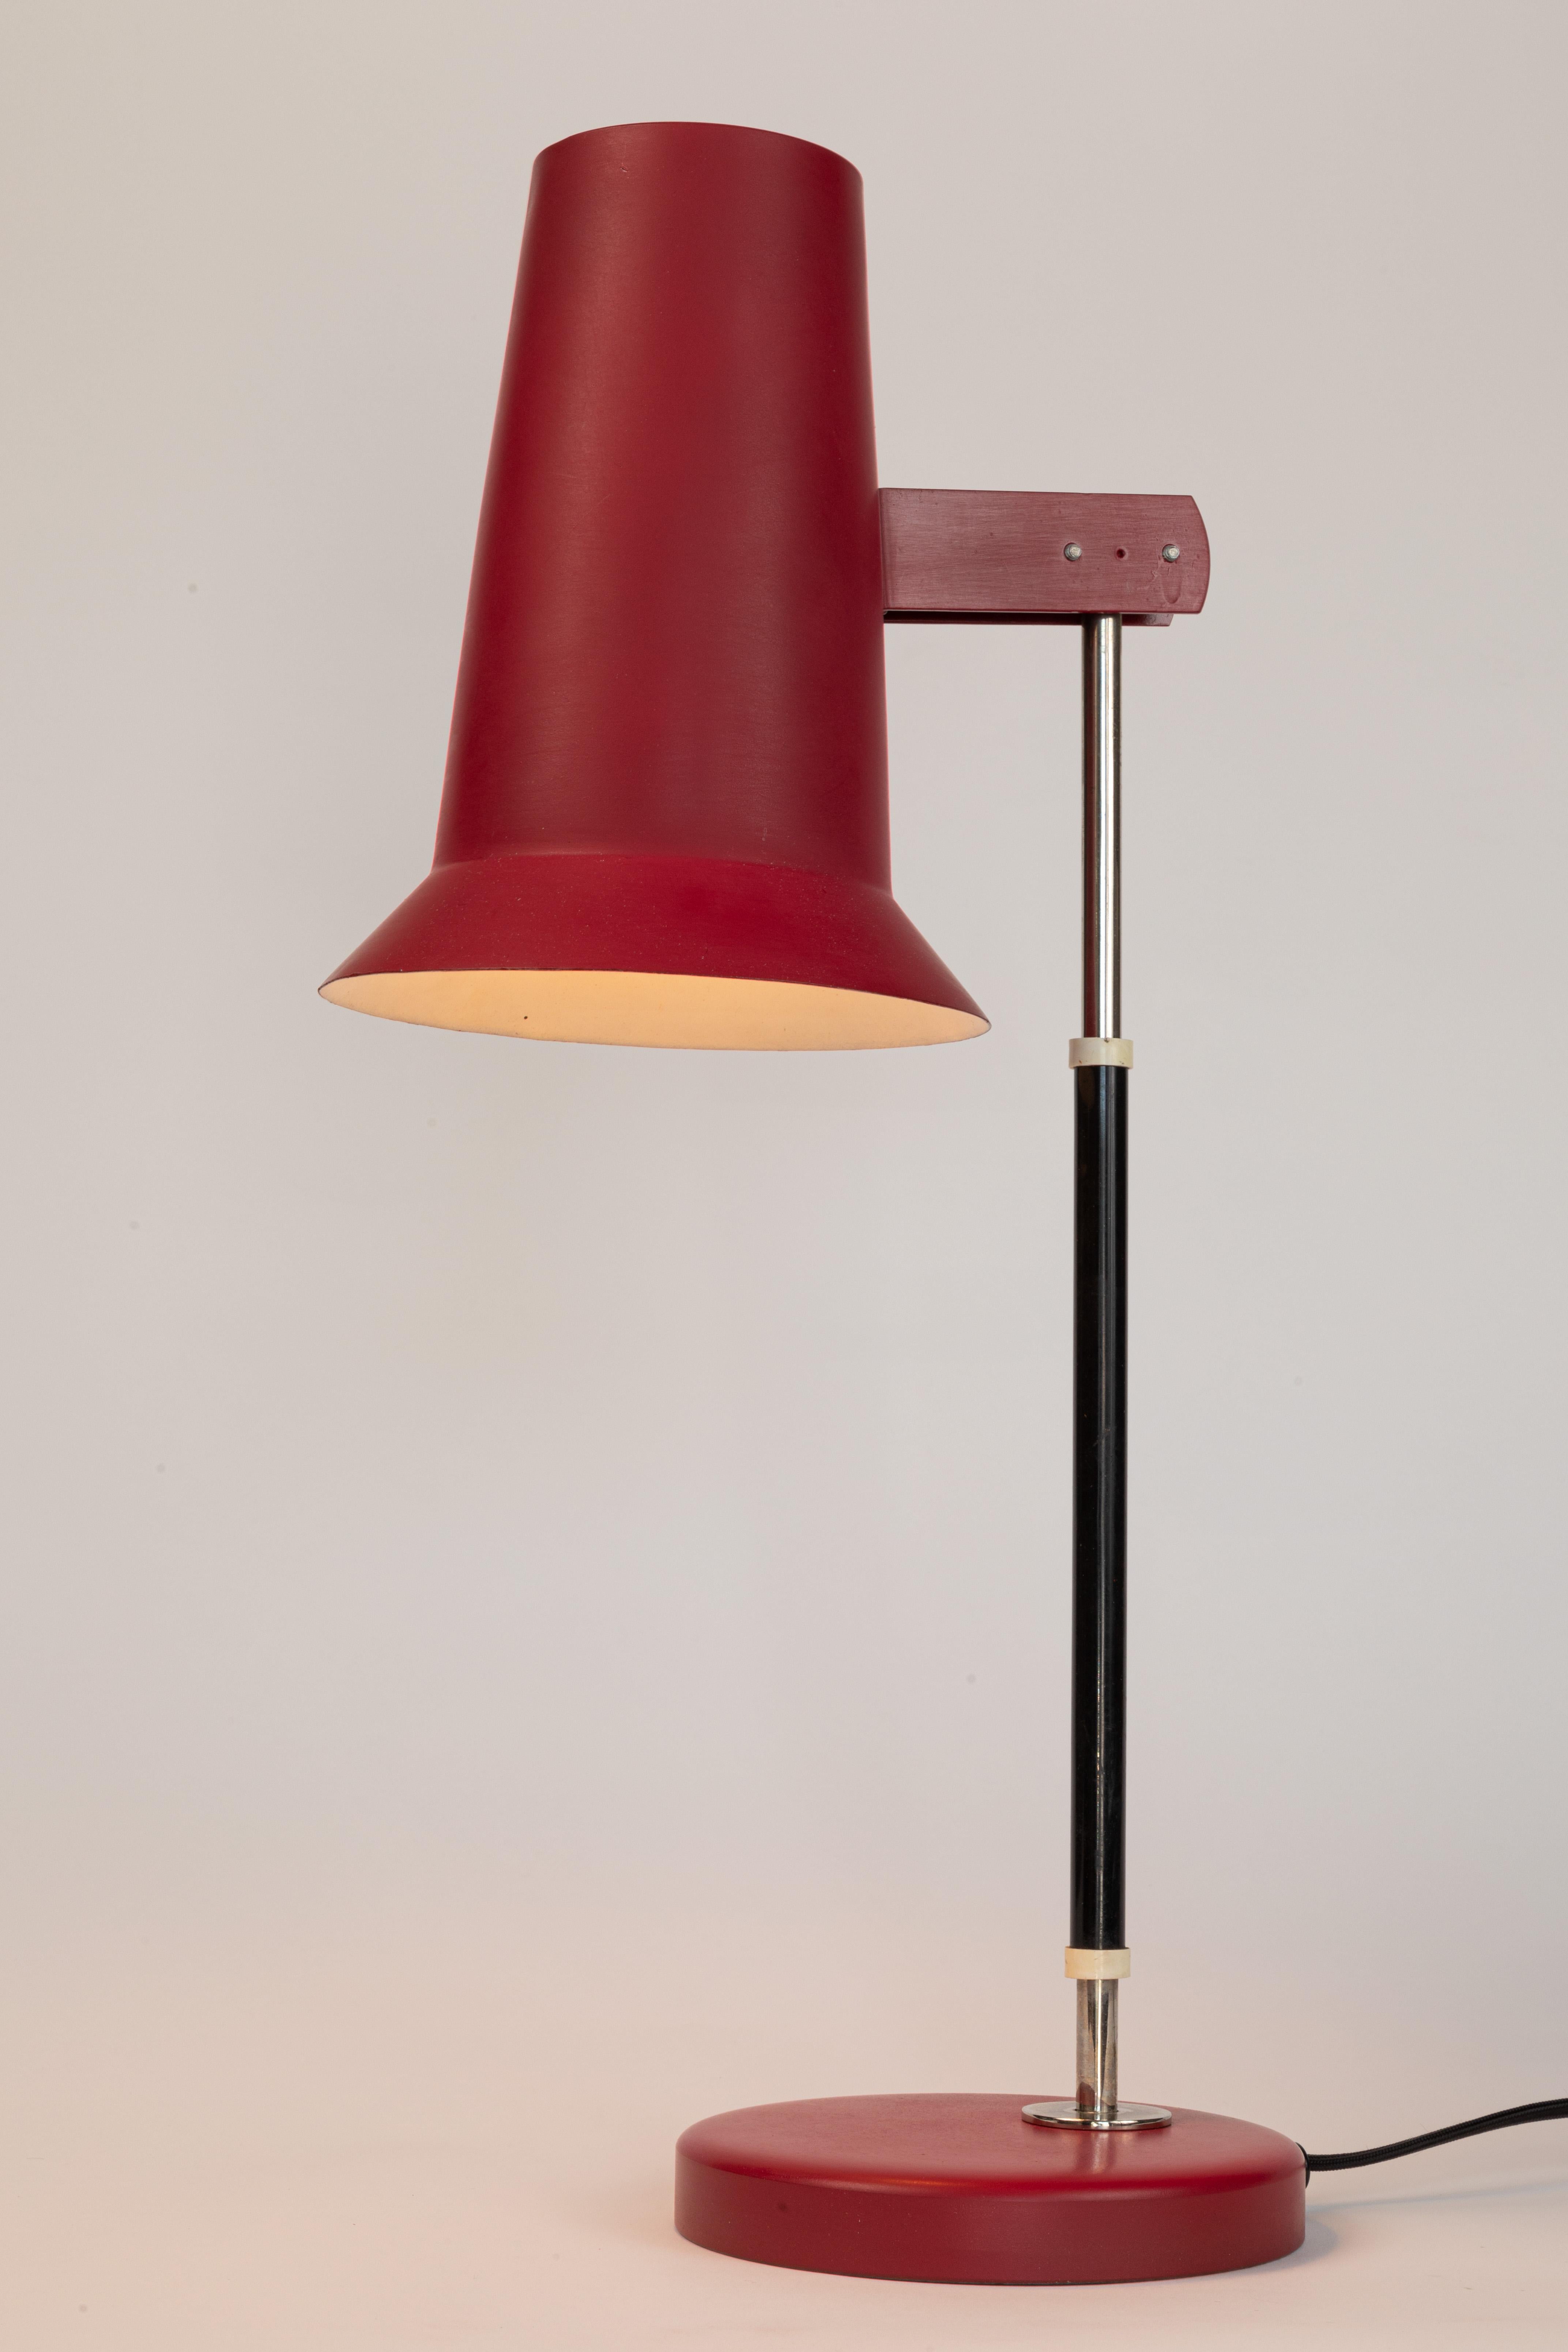 Finnish Pair of 1960s Yki Nummi Series 40-040 Red Table Lamps for Stockmann-Orno For Sale